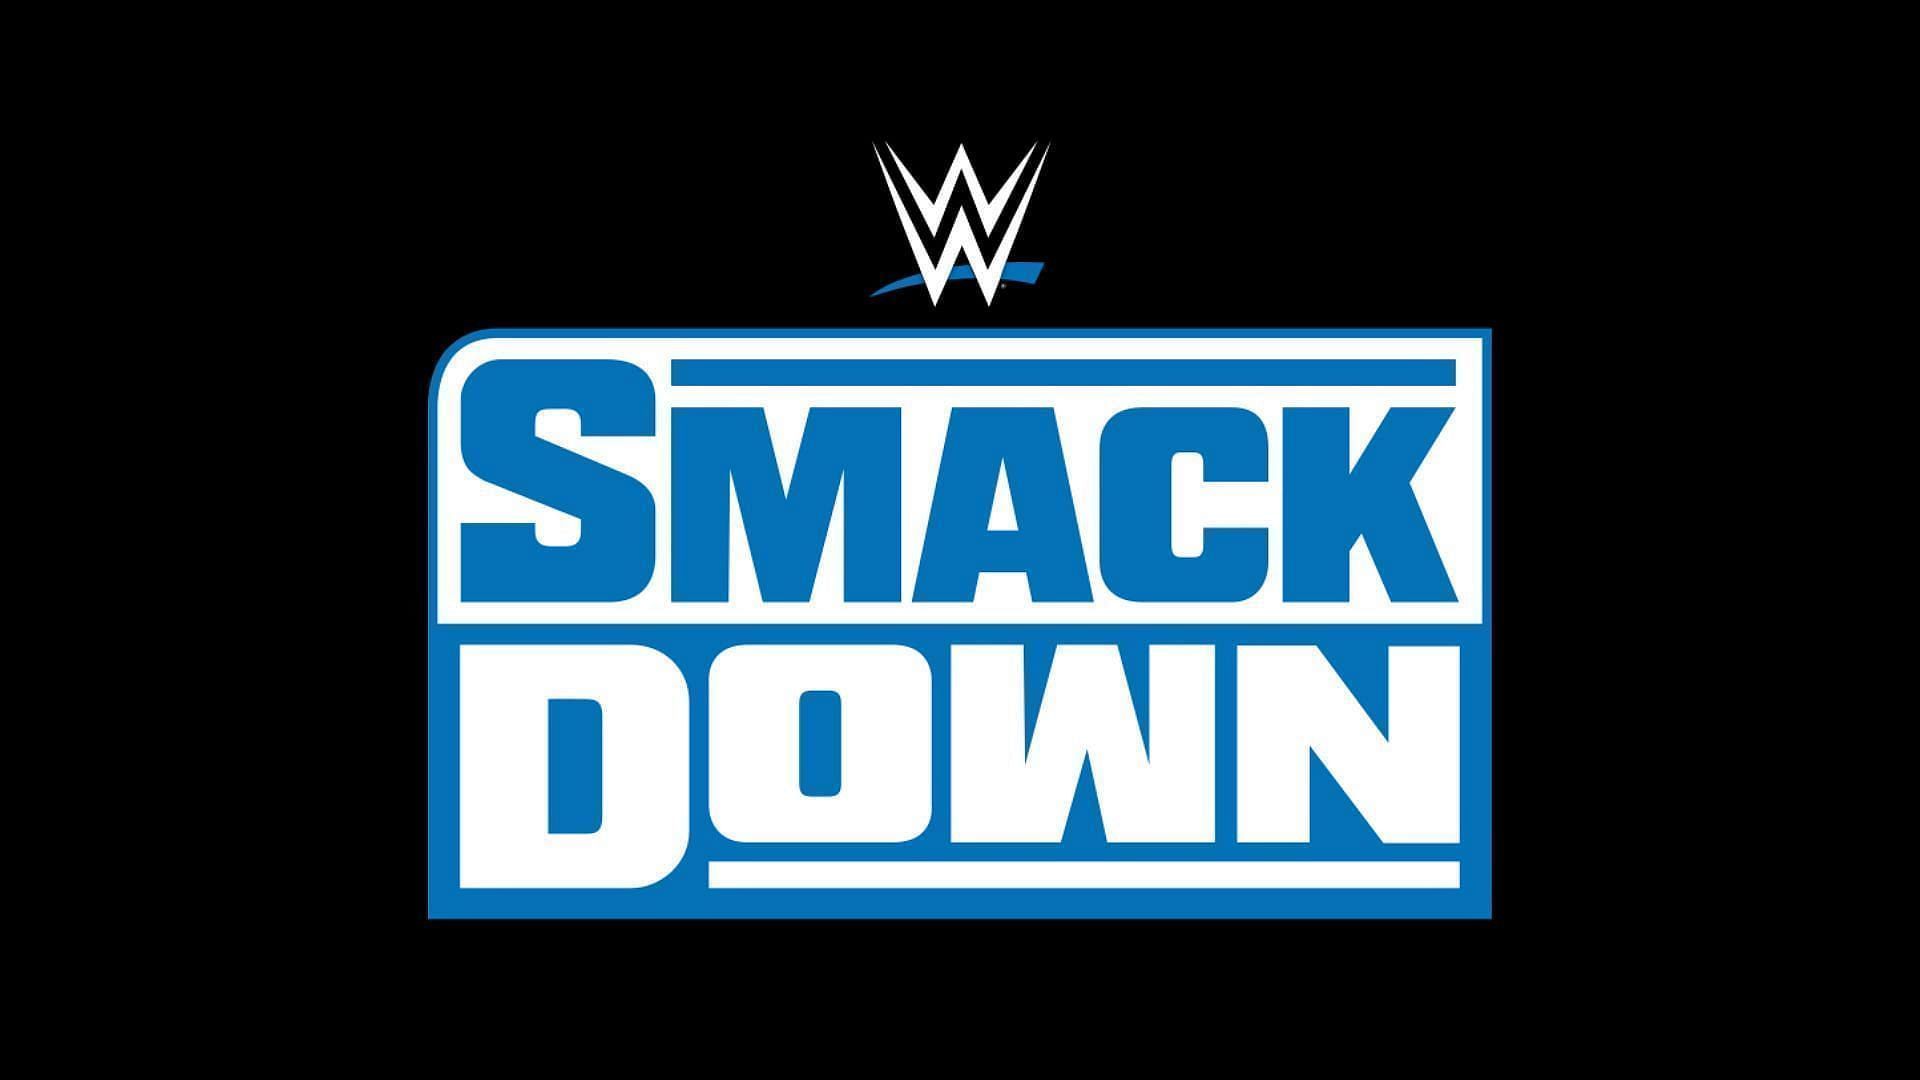 WWE SmackDown will receive a new home in the United States